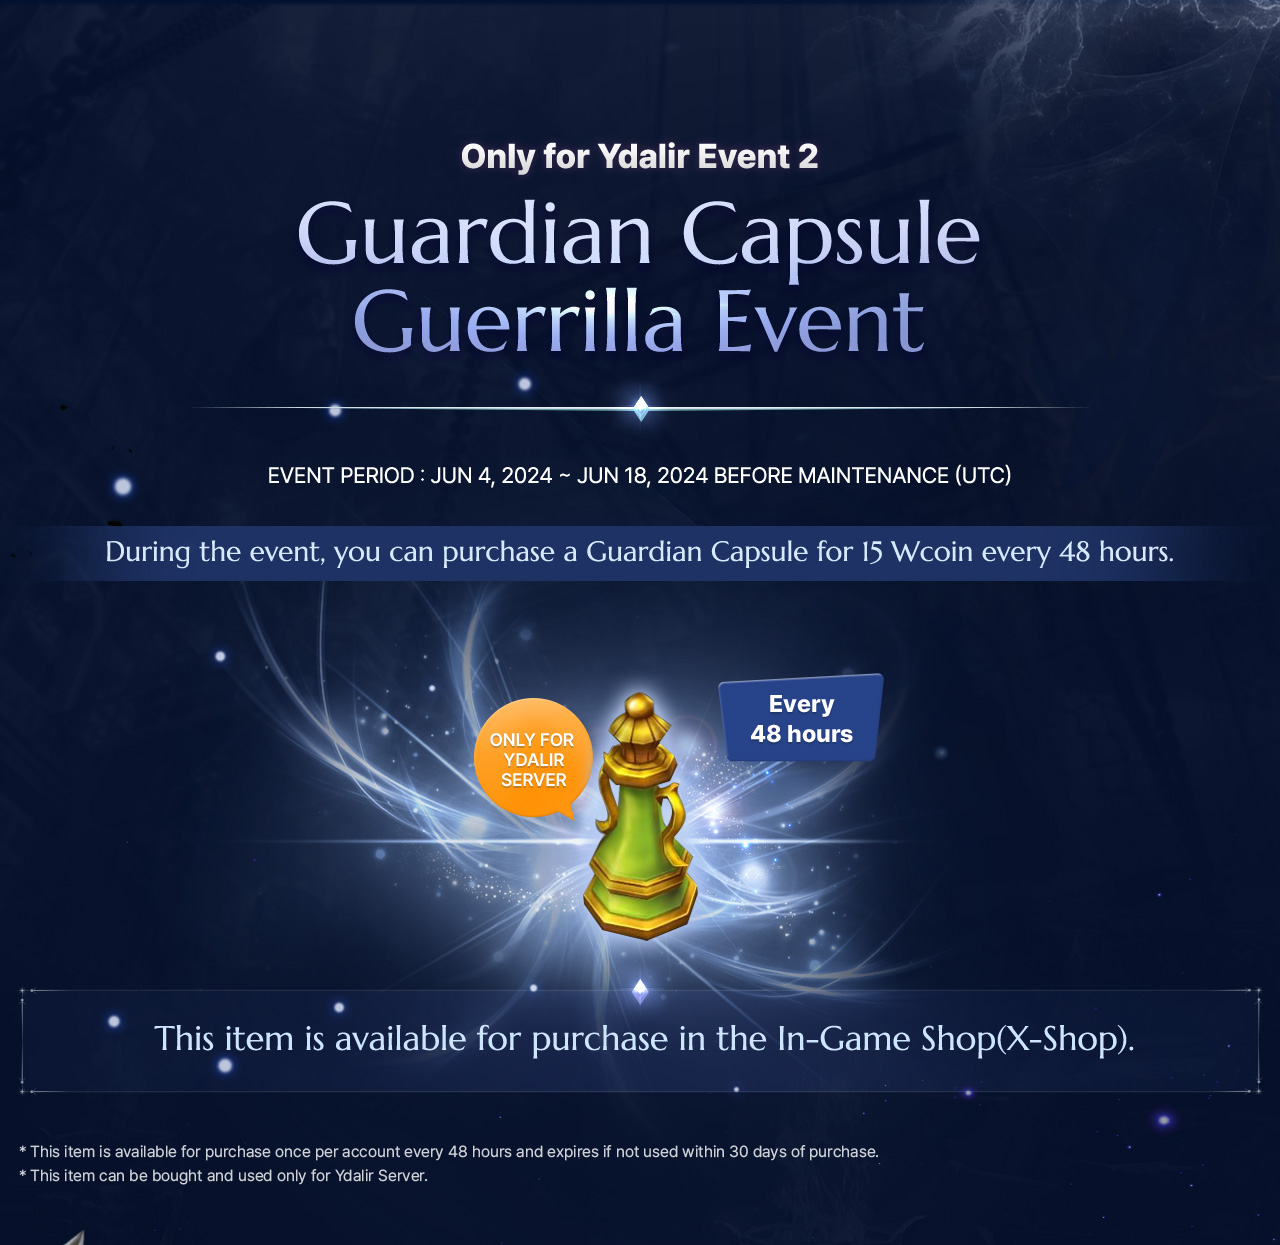 Only for Ydalir Event 2 Guardian Capsule Guerrilla Event